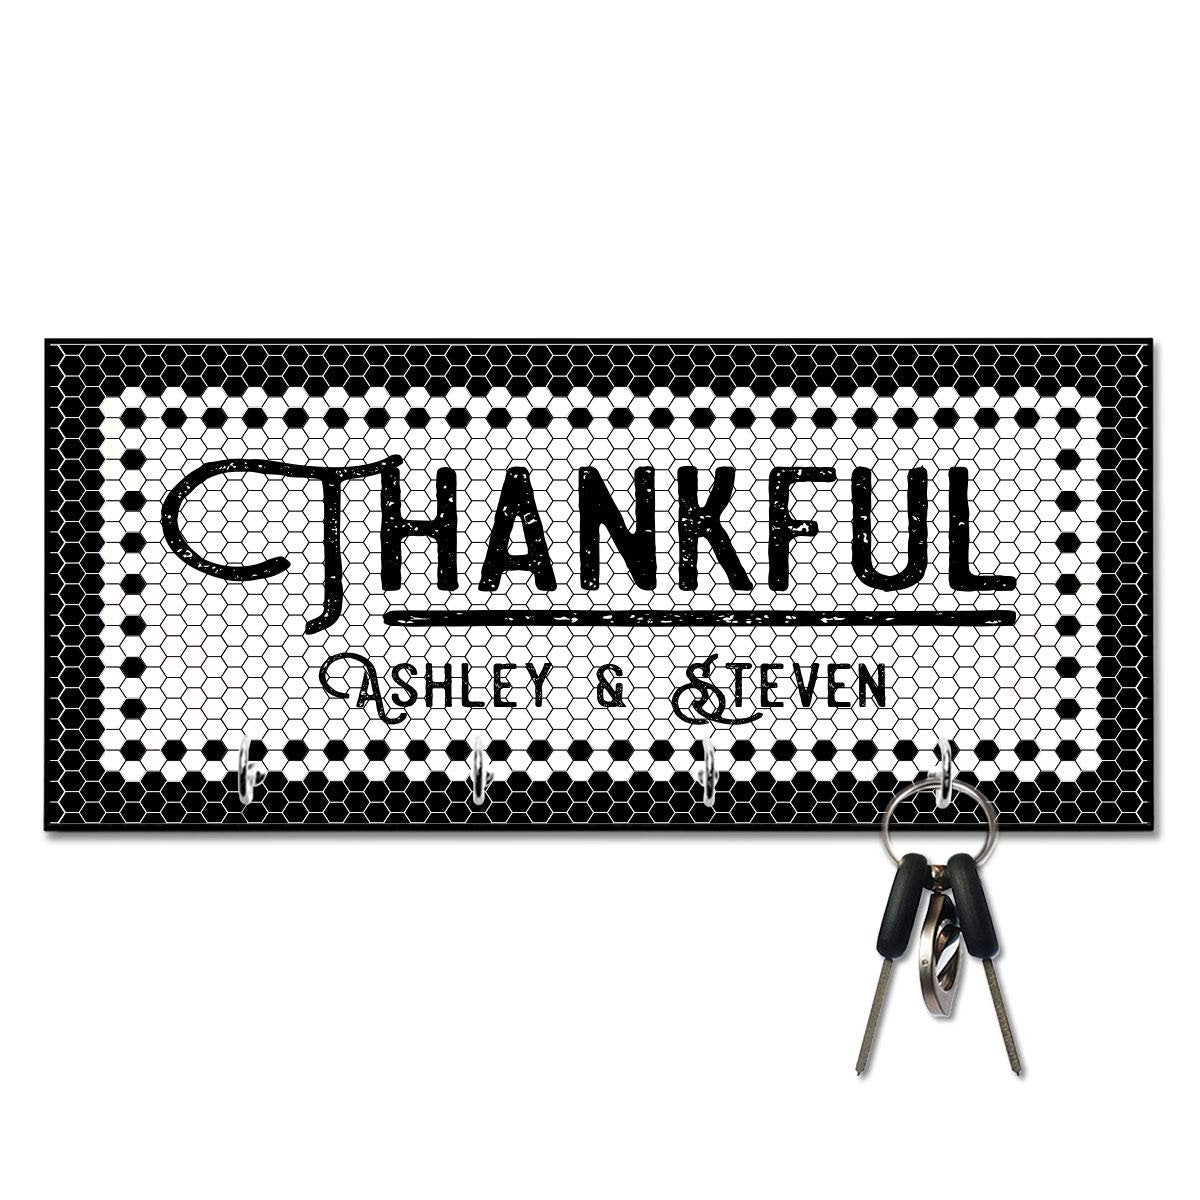 Personallized Black and White Tile Look Look - Thankful - Key Hanger